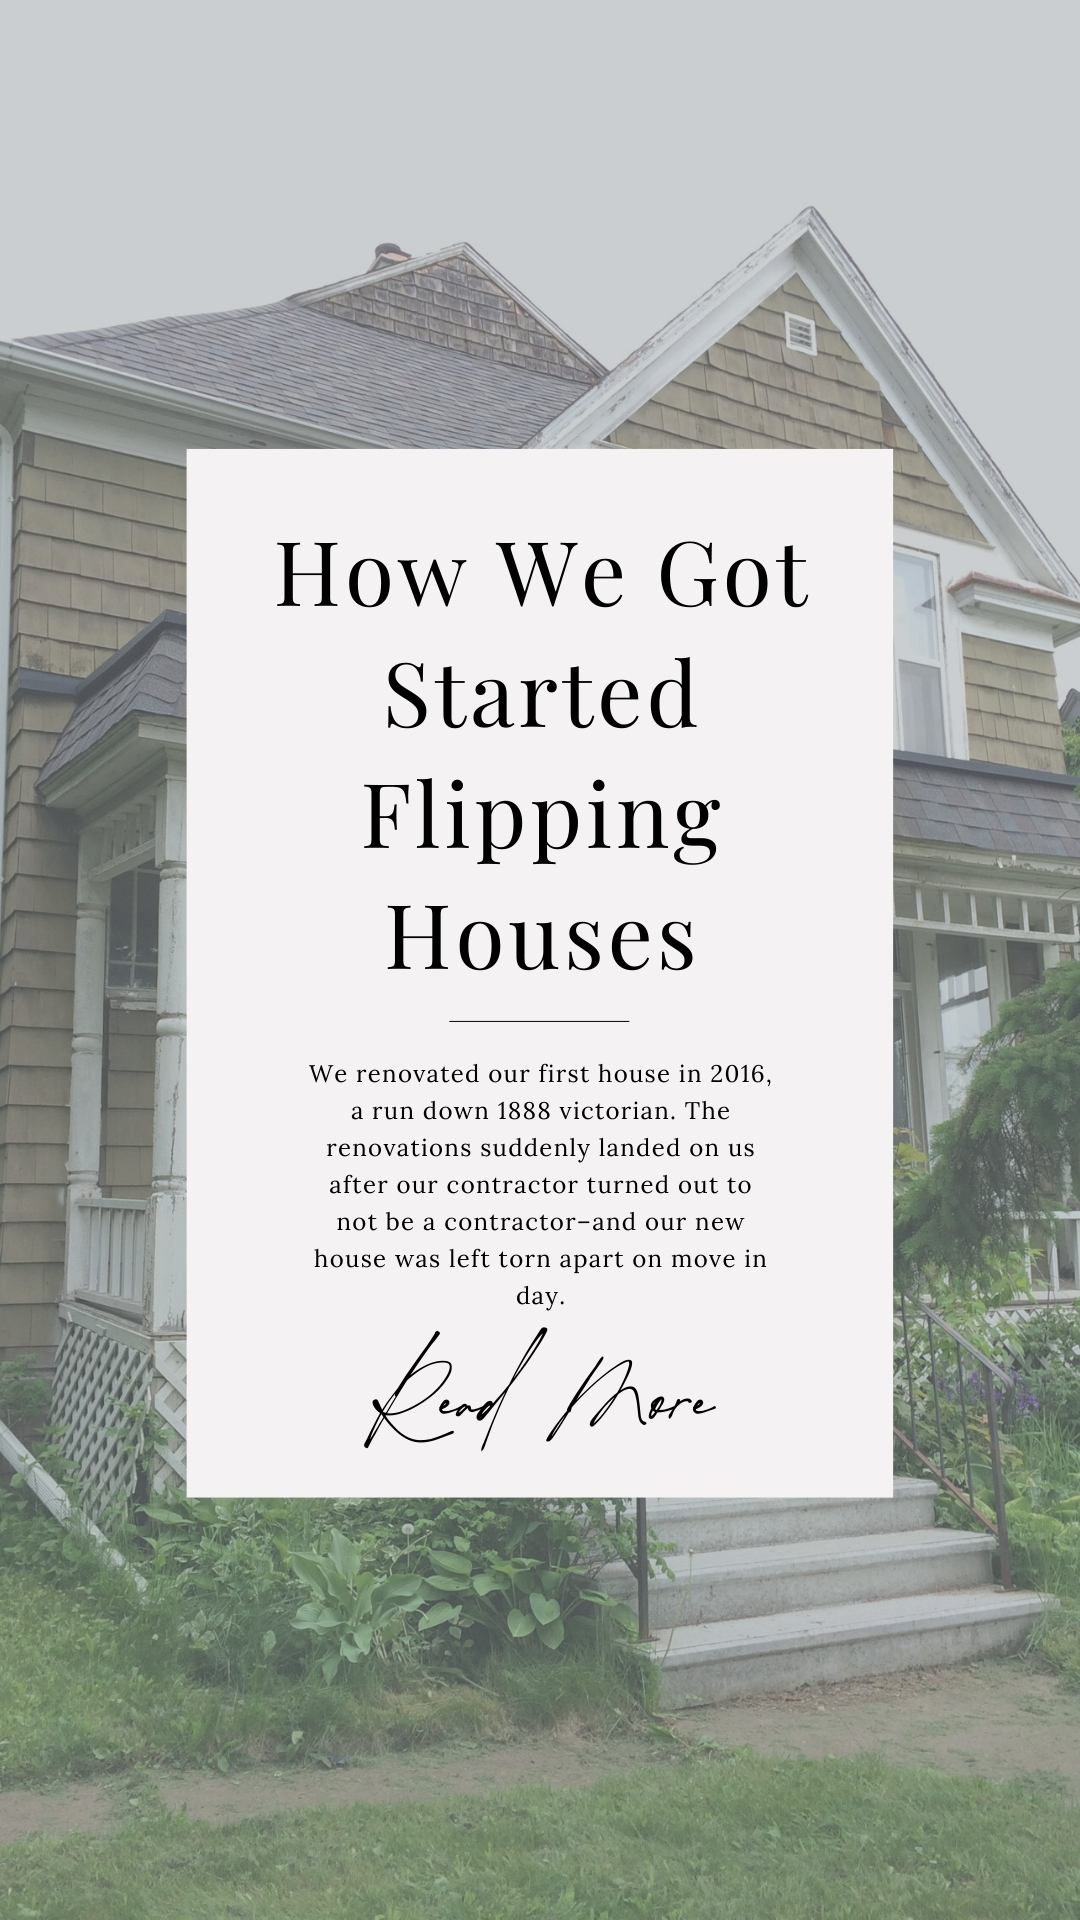 How We Got Started Flipping Houses